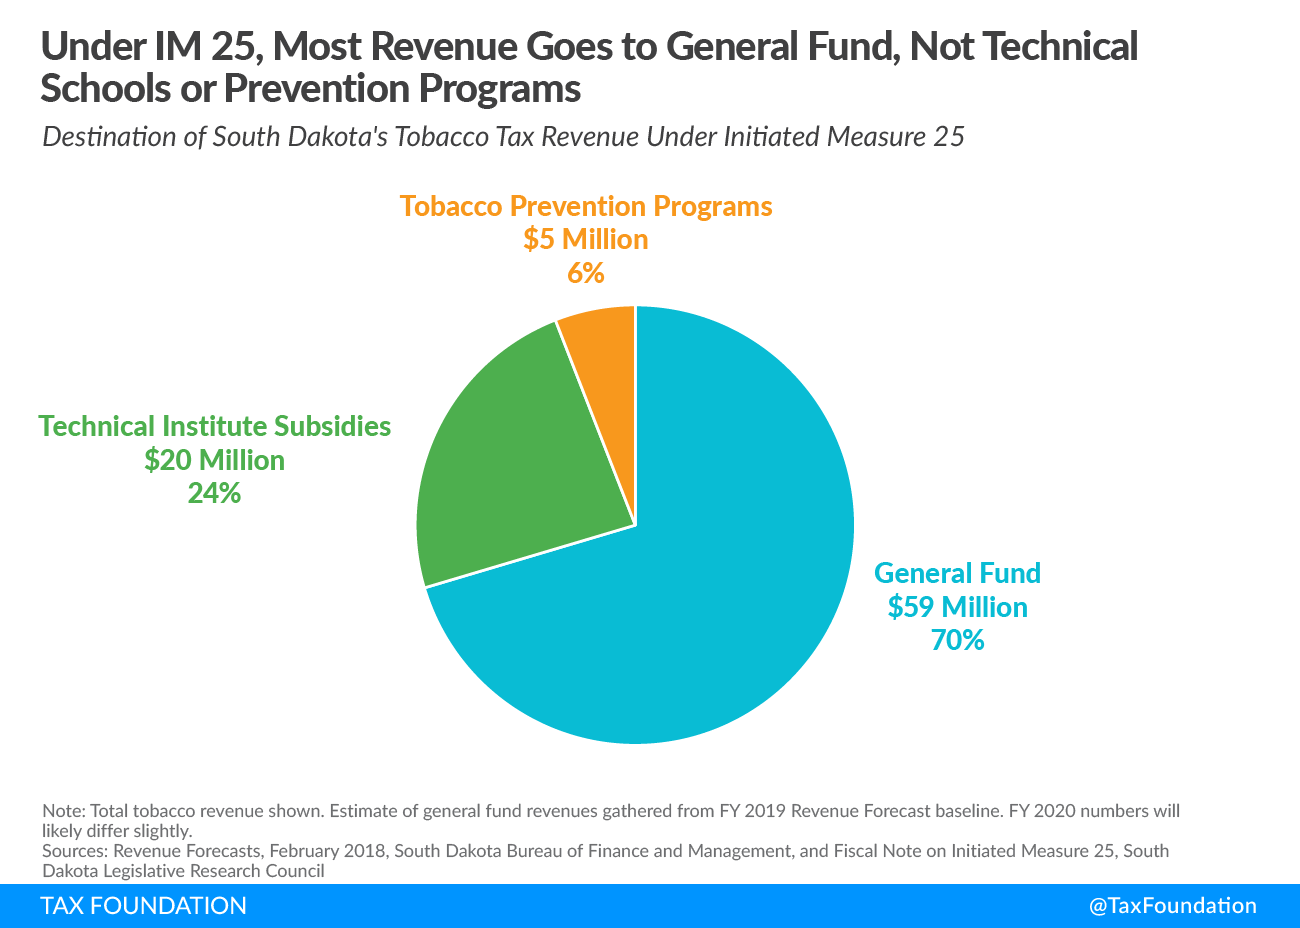 Under IM 25, Most Revenue Goes to General Fund, Not Technical Schools or Prevention Programs